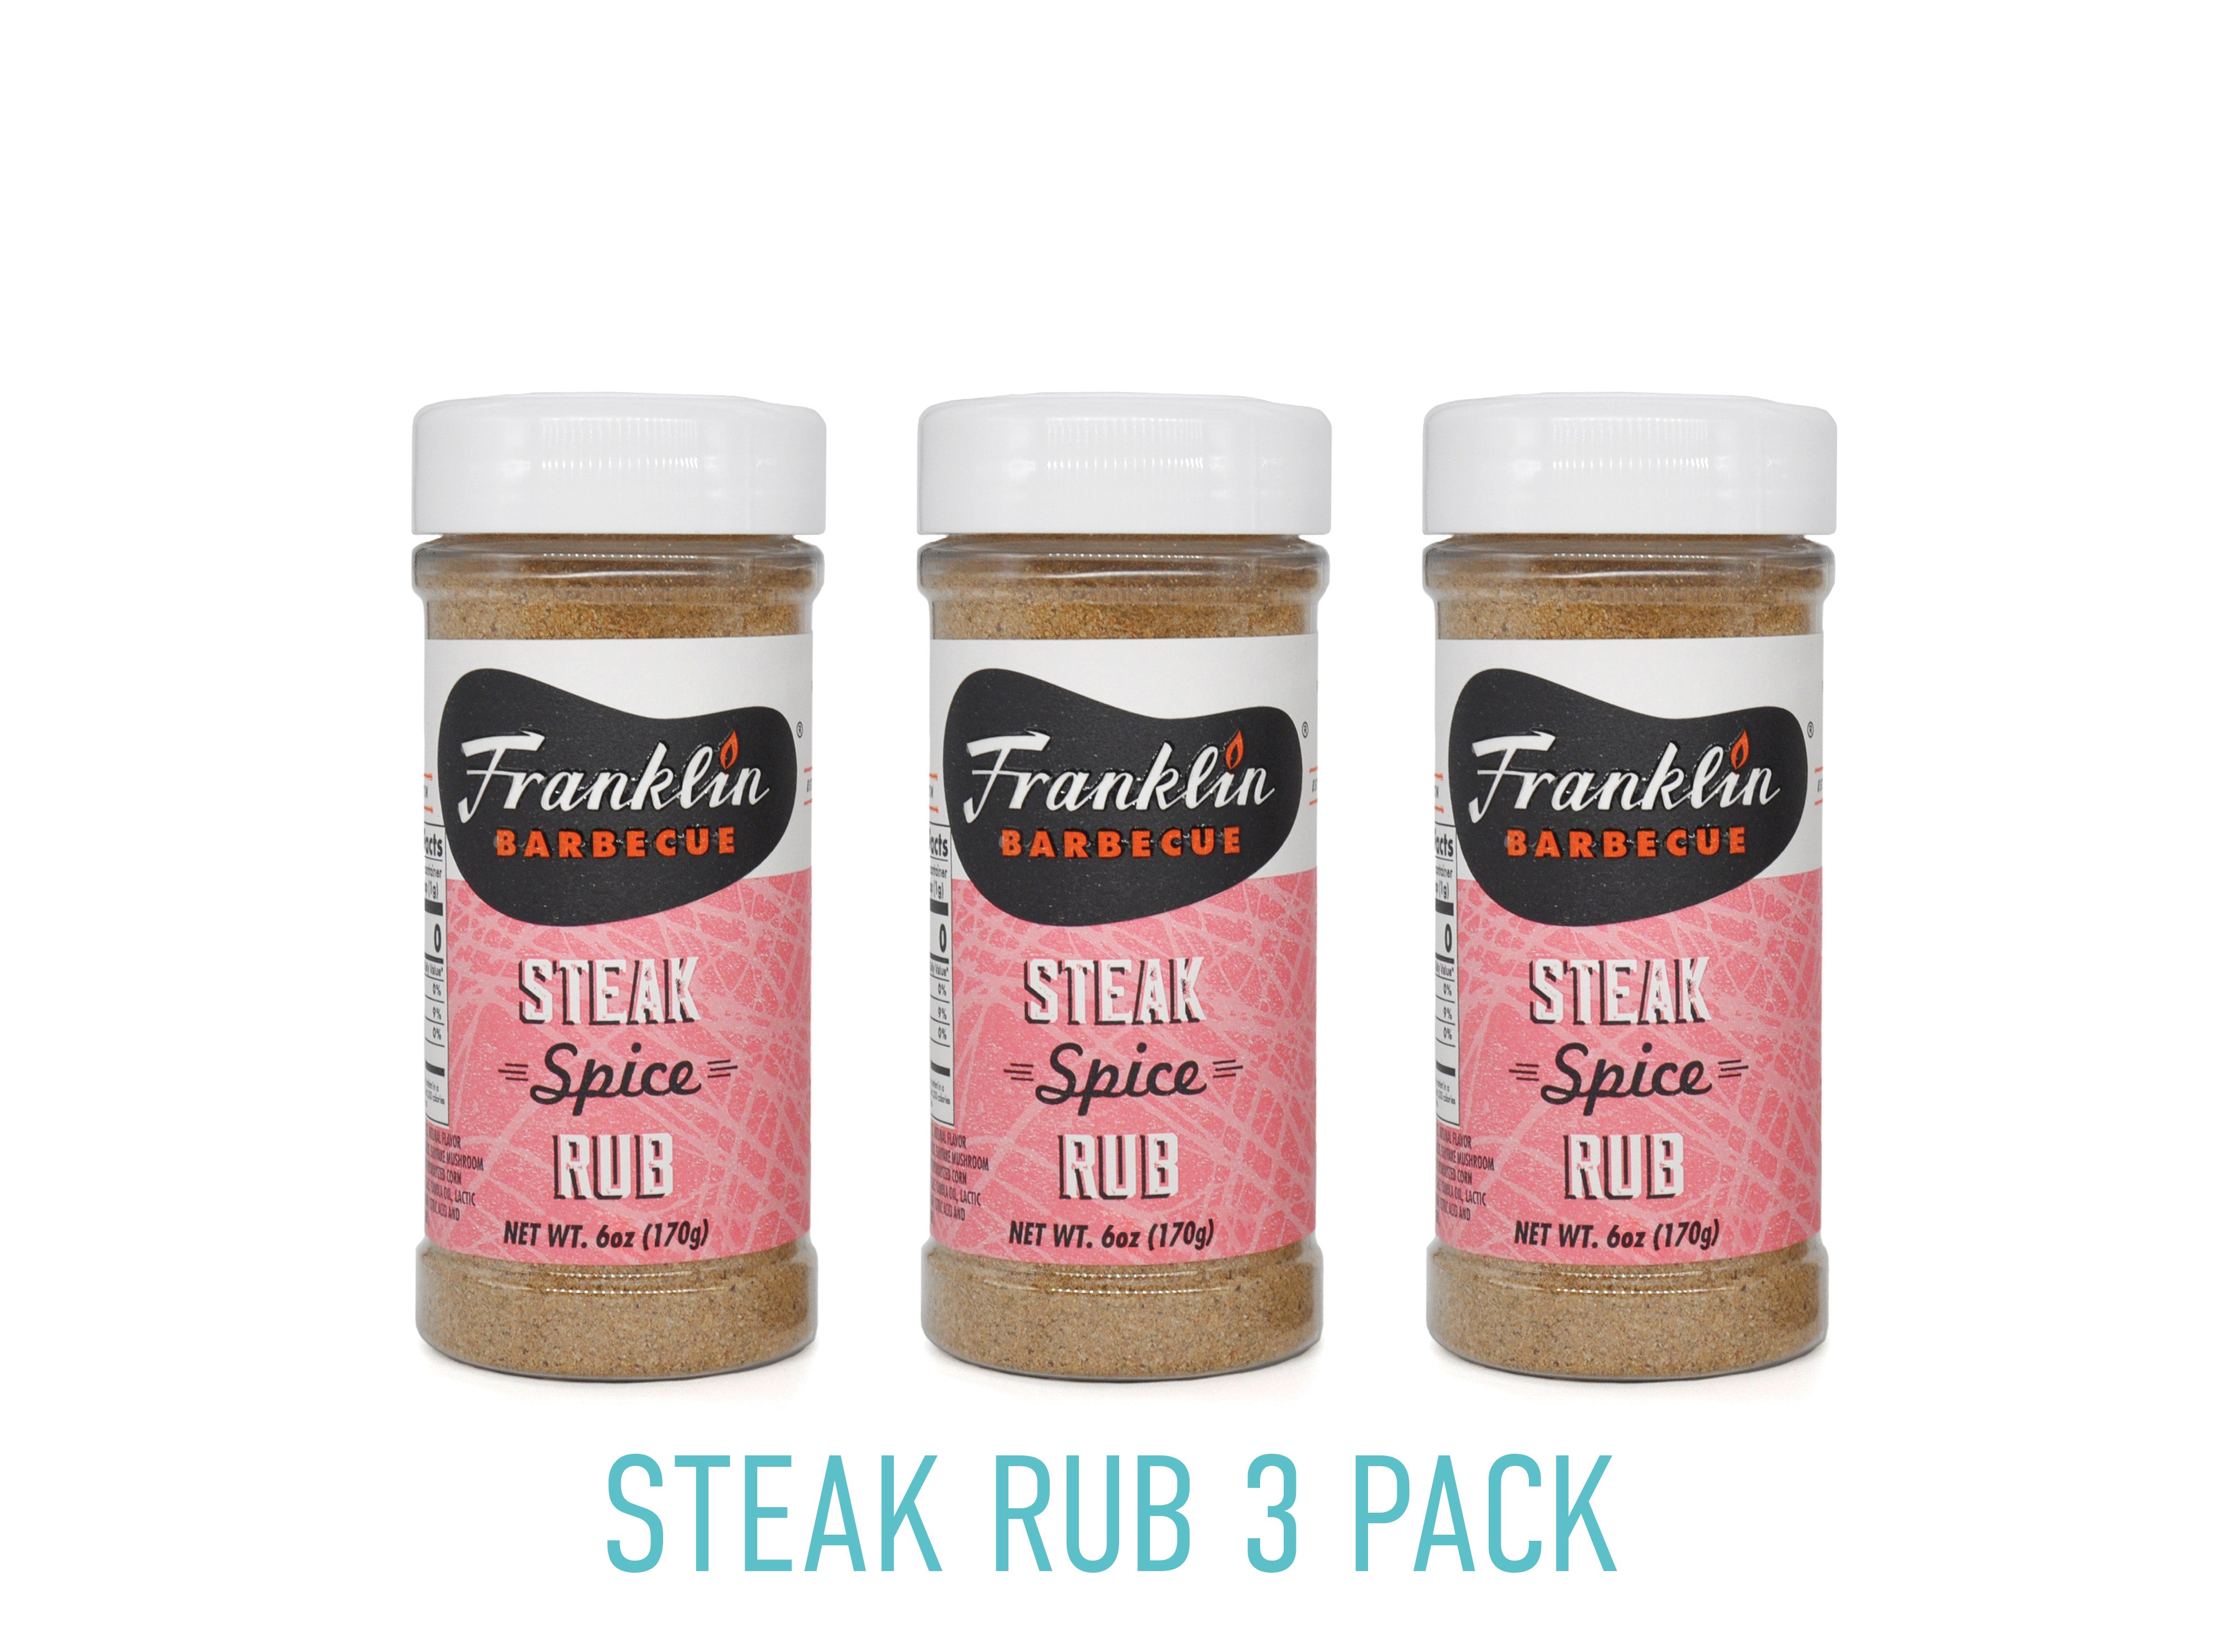 6 oz Steak Rub 3 pack with pink label and Franklin Barbecue bean logo in black with white and orange lettering